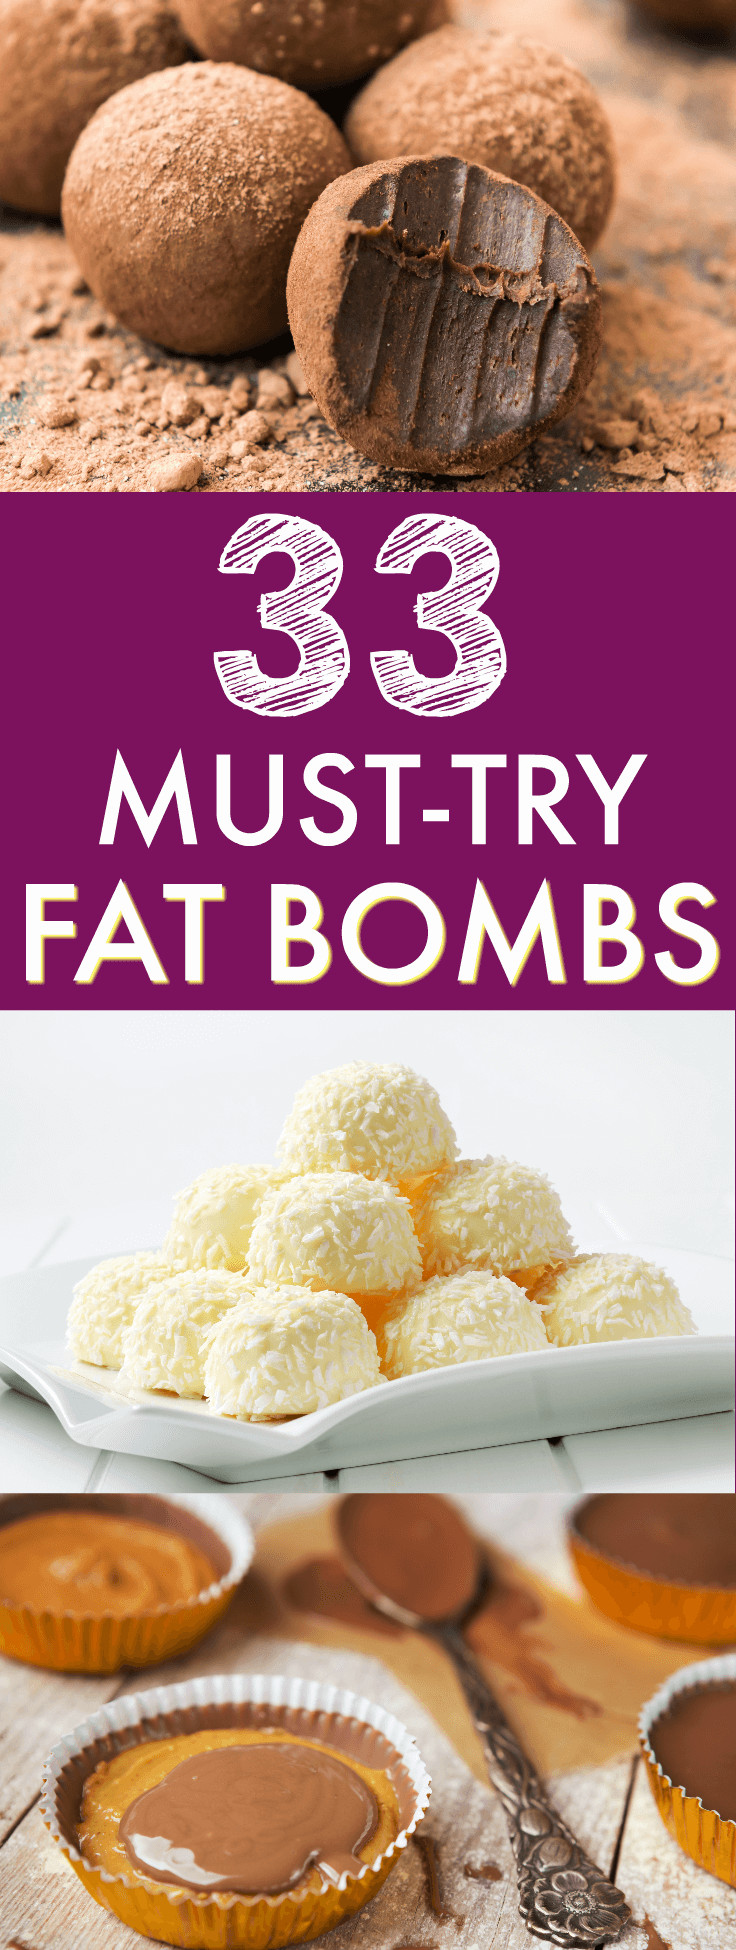 Keto Diet Recipes Fat Bombs
 33 Delicious Fat Bombs Recipes for Keto or Low Carb Diets